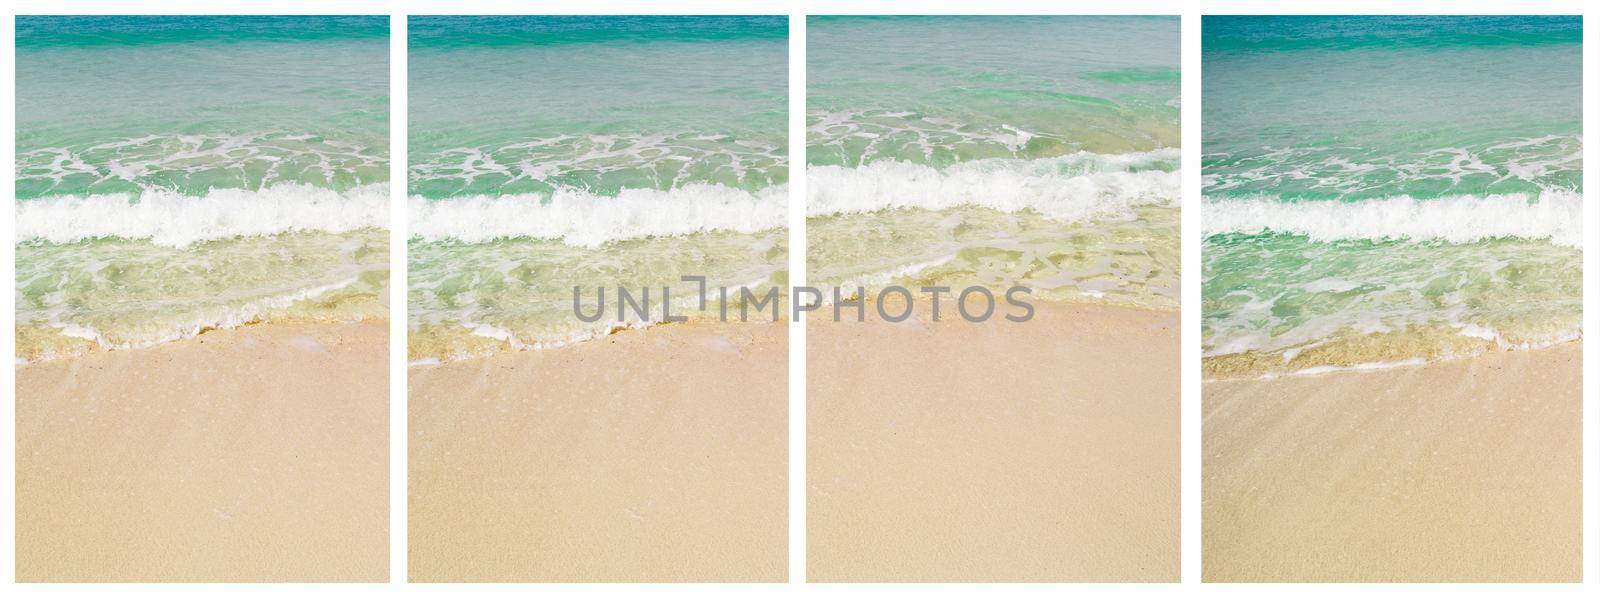 Beatiful sea coast view collage with sand, ocean and waves. Idellyc paradise place pictures set with holiday tropical vibes